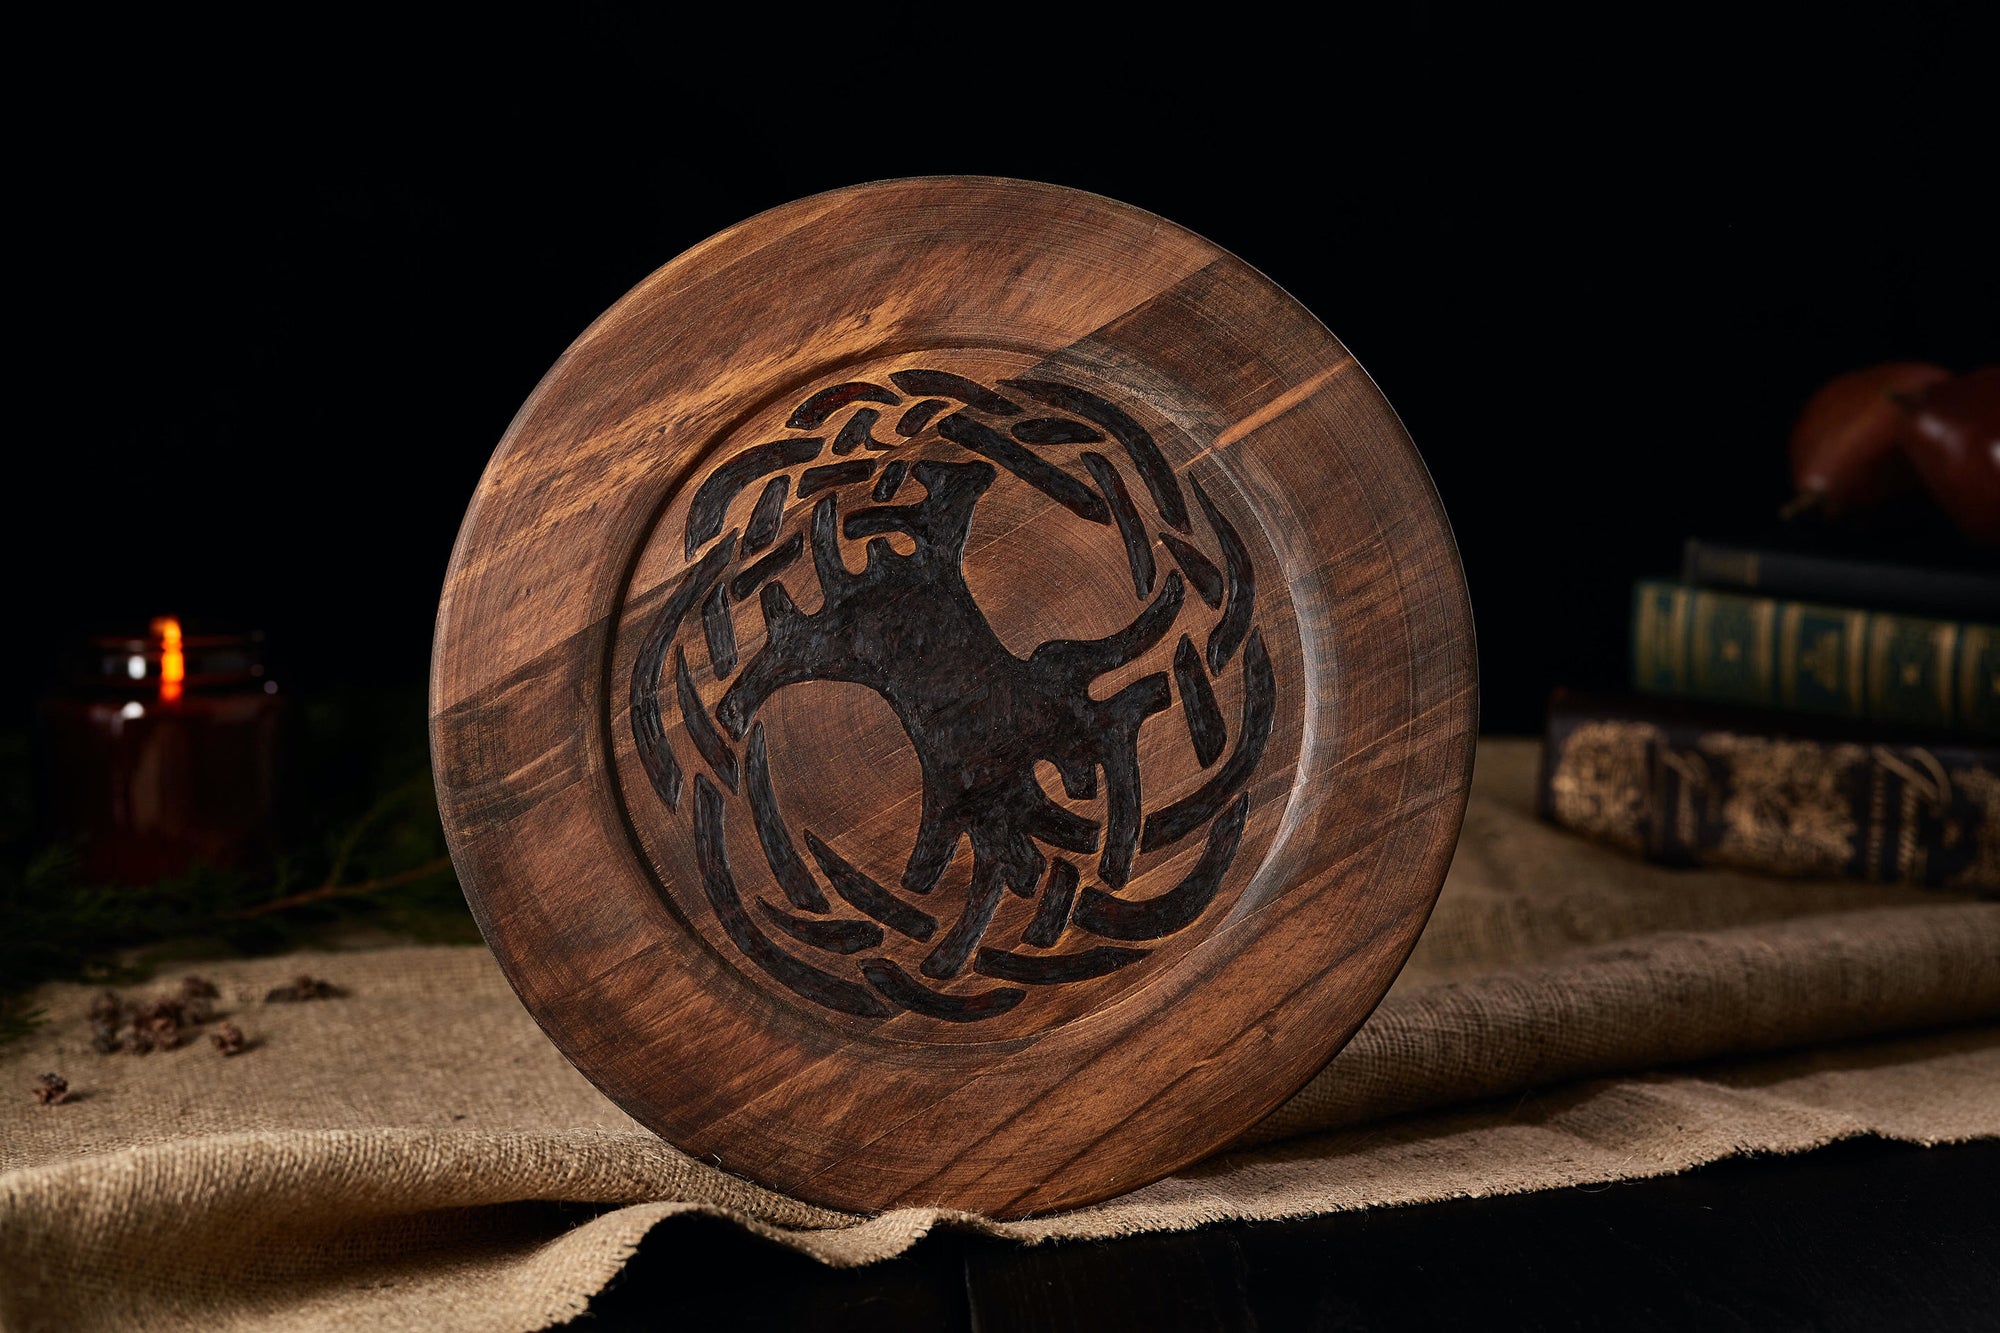 Gunhild - Carved Plate with Yggdrasil